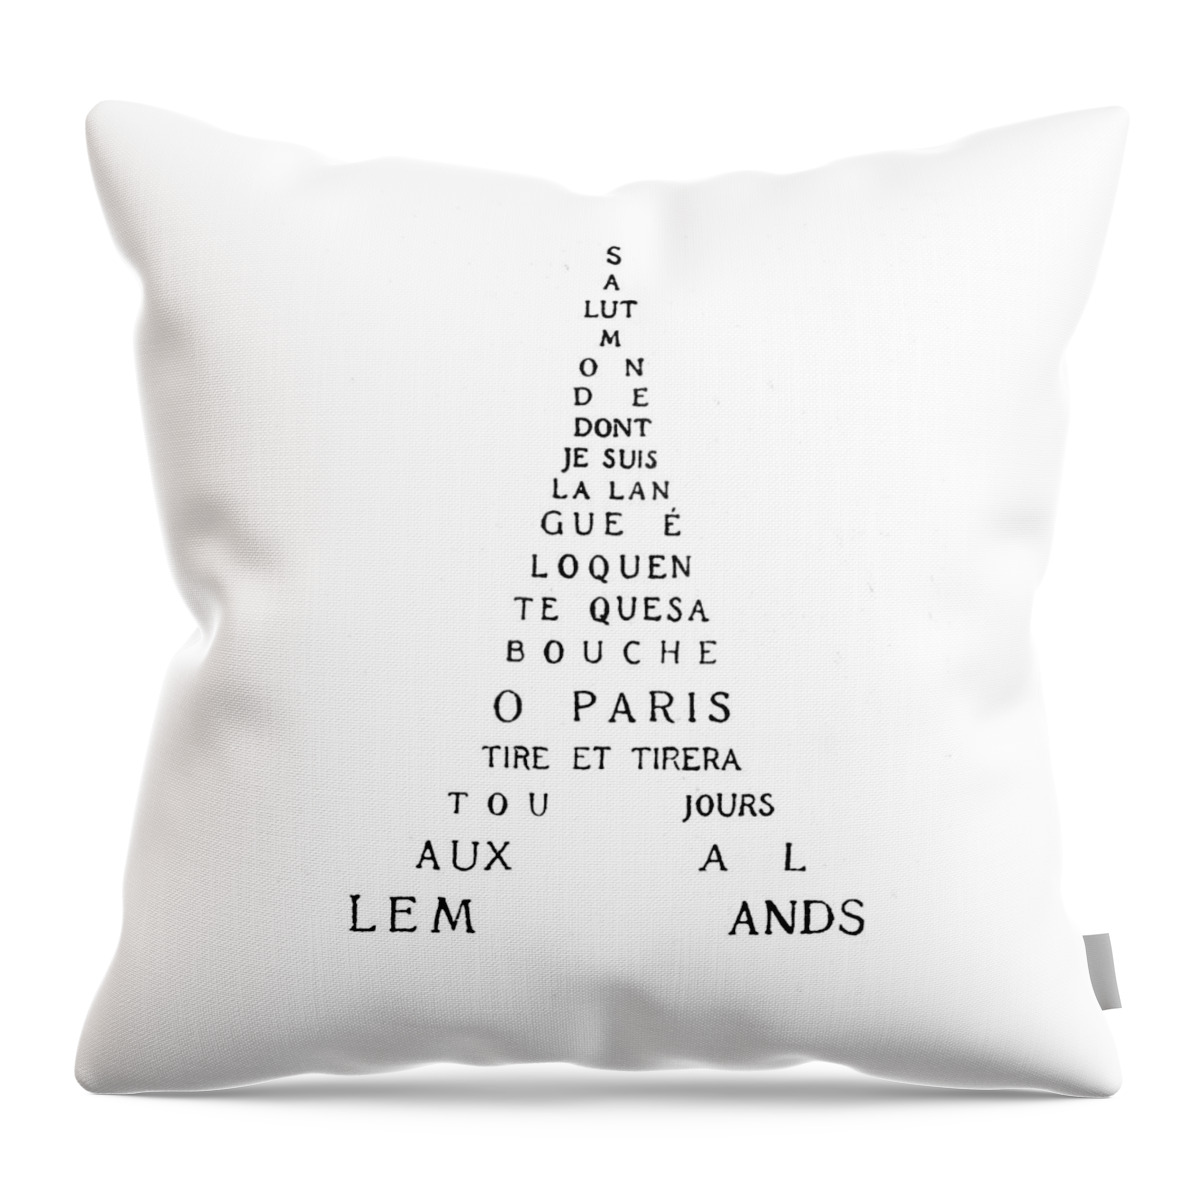 Eiffel Tower Throw Pillow featuring the drawing Eiffel Tower by Guillaume Apollinaire